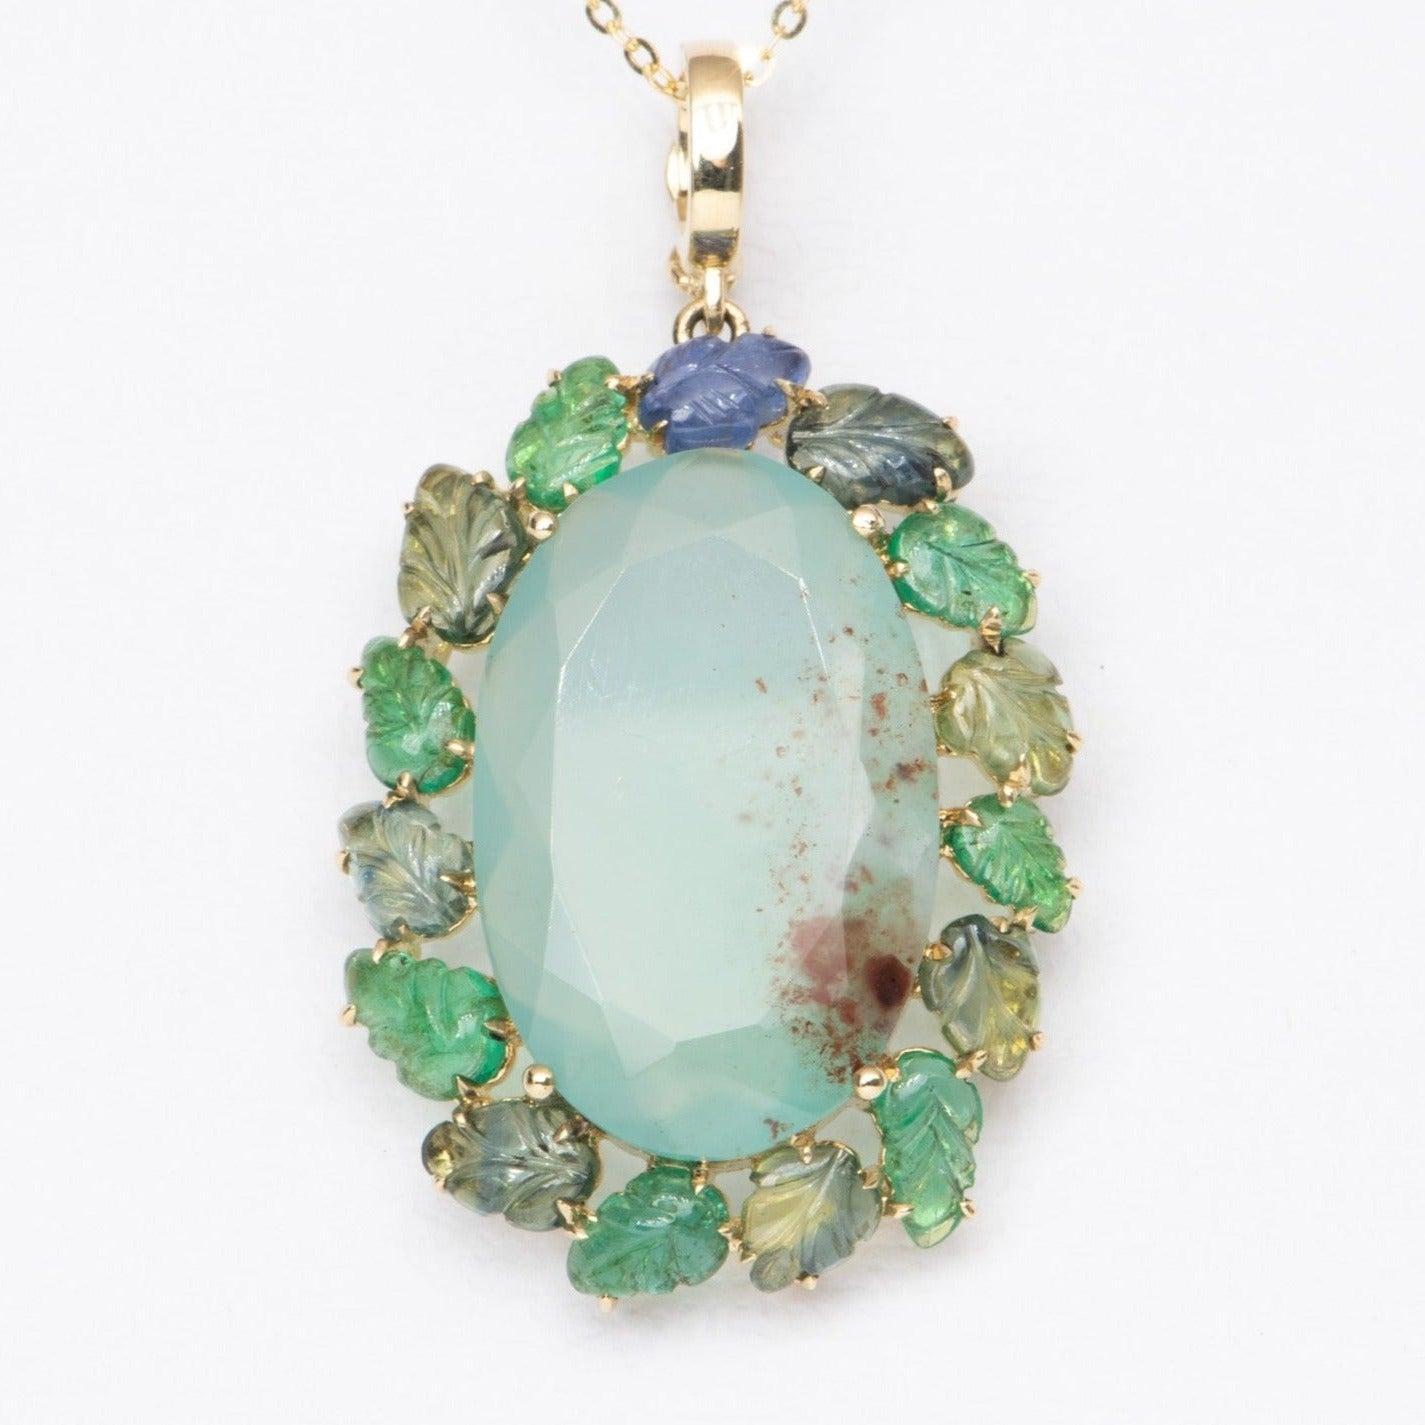 ♥ A solid 9K gold statement pendant set with a stunning Aquaprase in the center, flanked by Emerald and Sapphire carved leaves
♥ The setting measures 42.7 mm in length, 25 mm in width, and 7.4 mm thick

♥ Material: 9K Yellow Gold
♥ Gemstone: